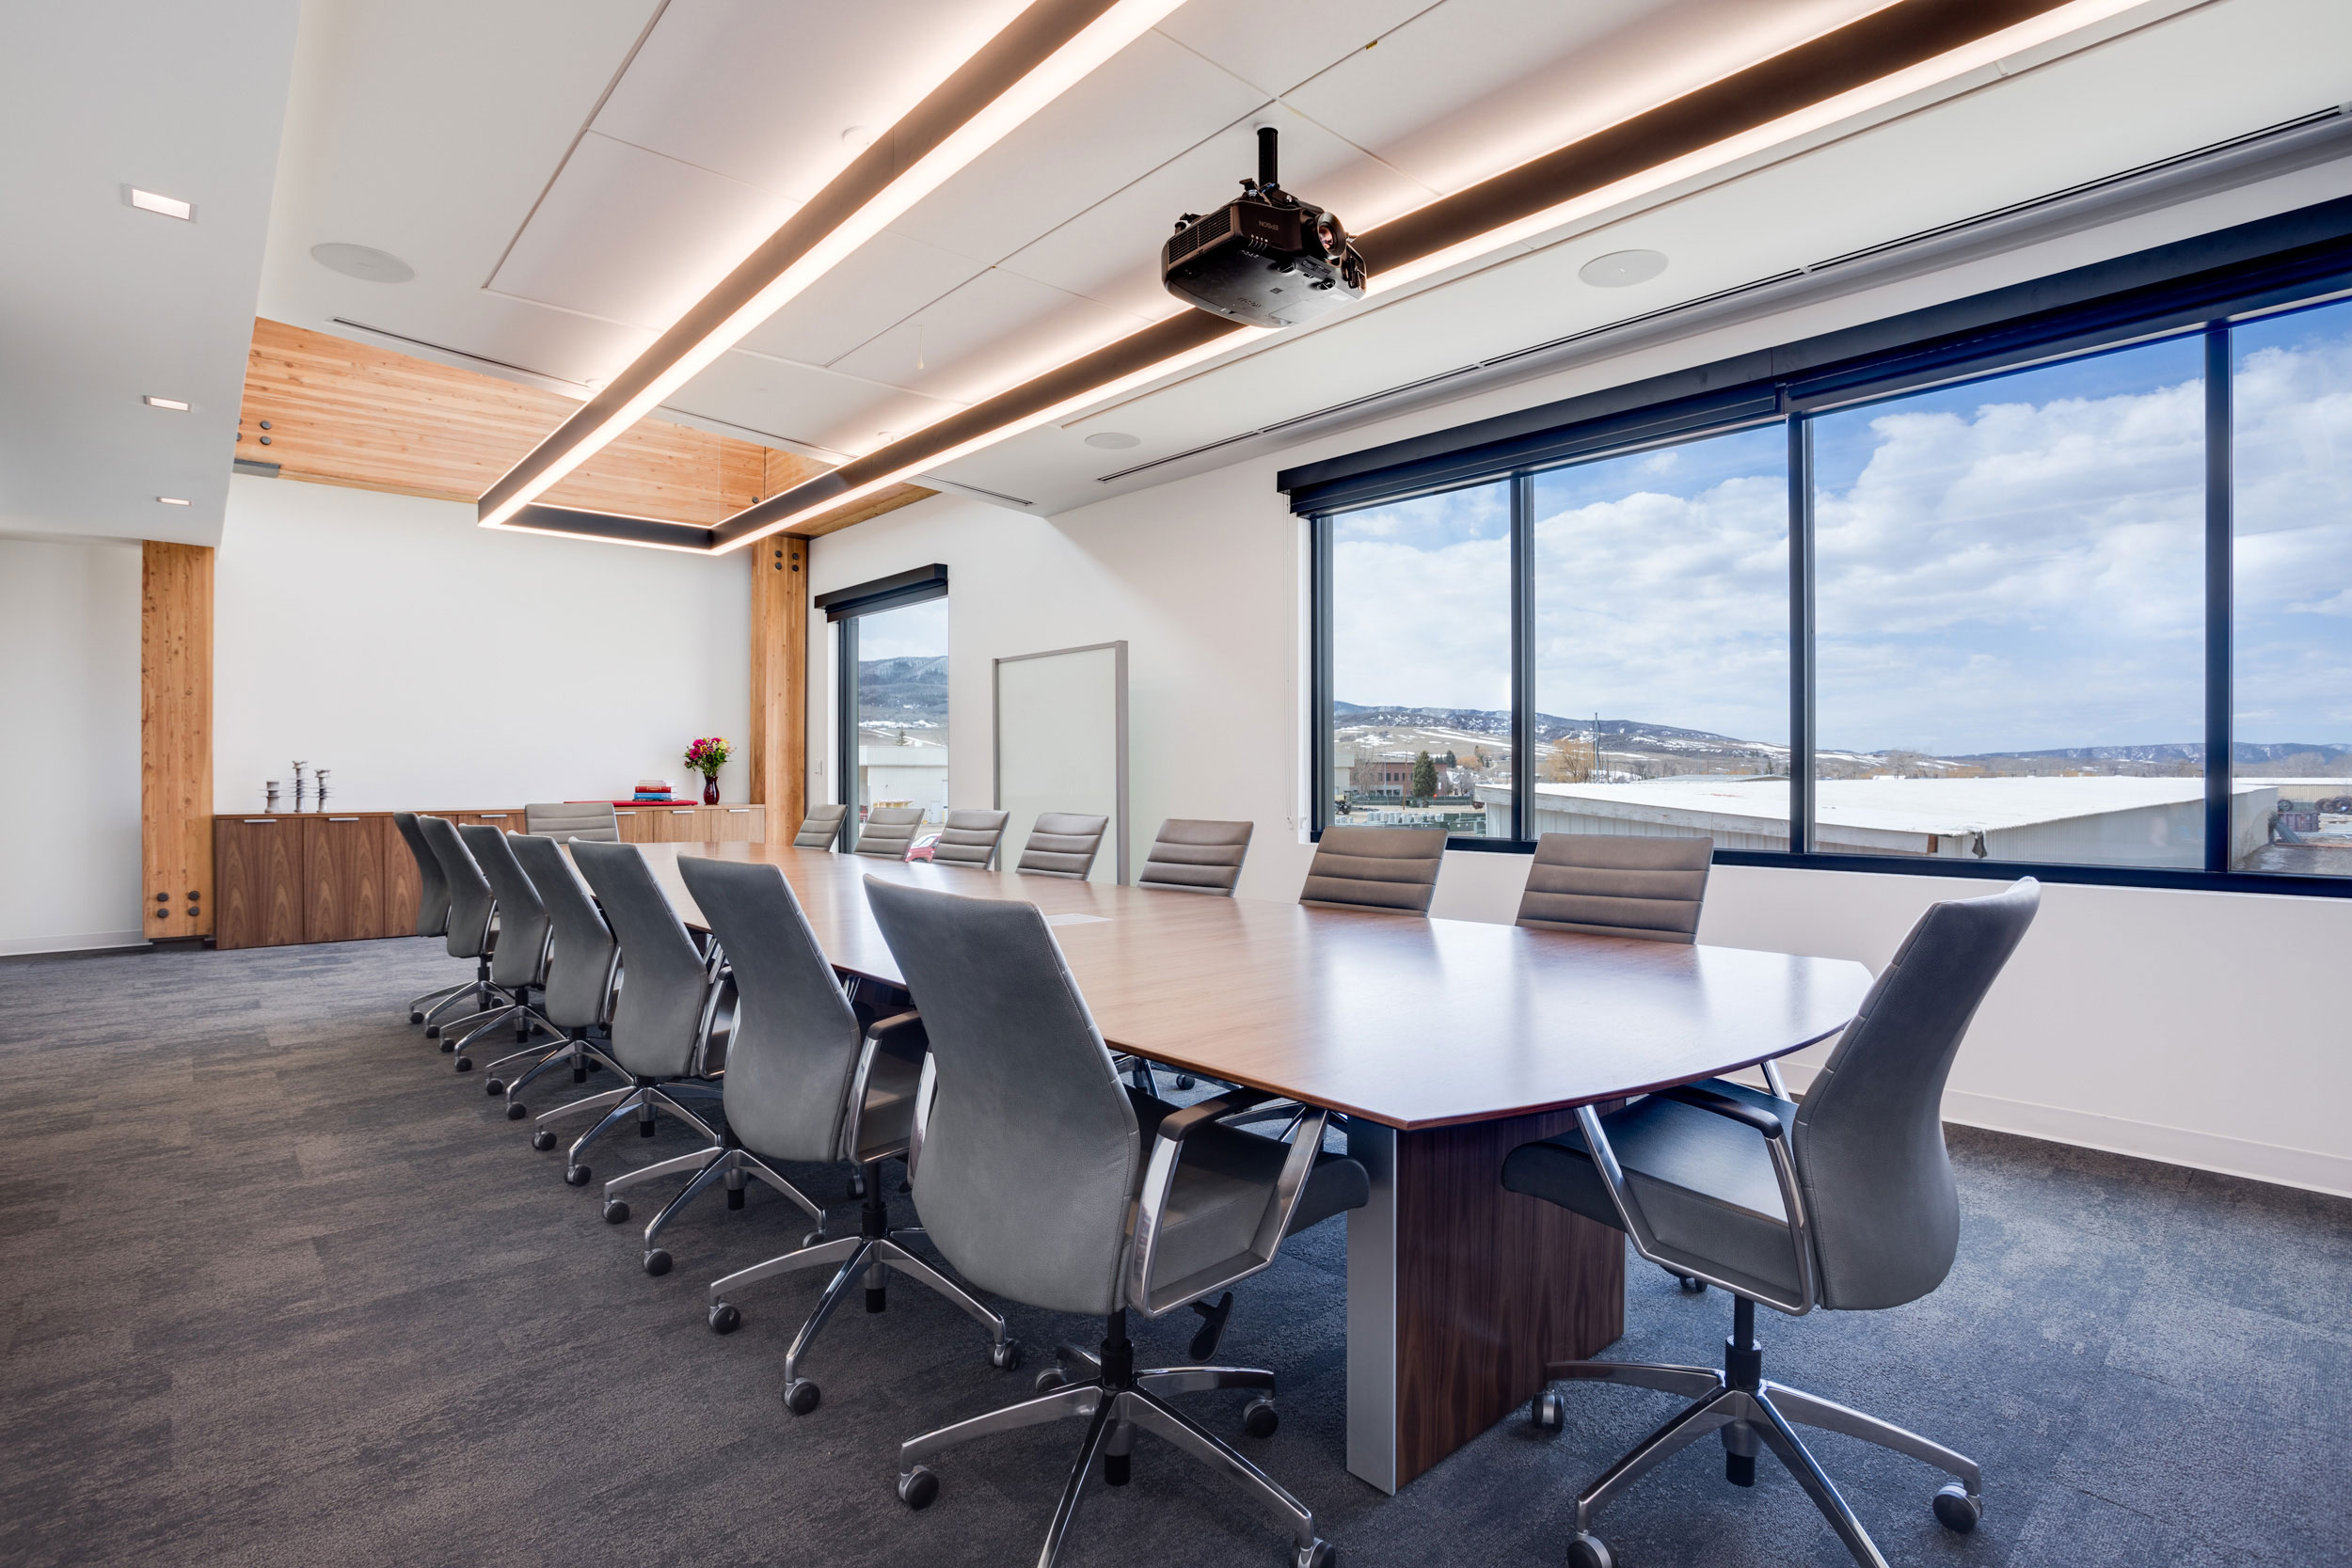 Conference room by Calcon Constructors in Steamboat Springs